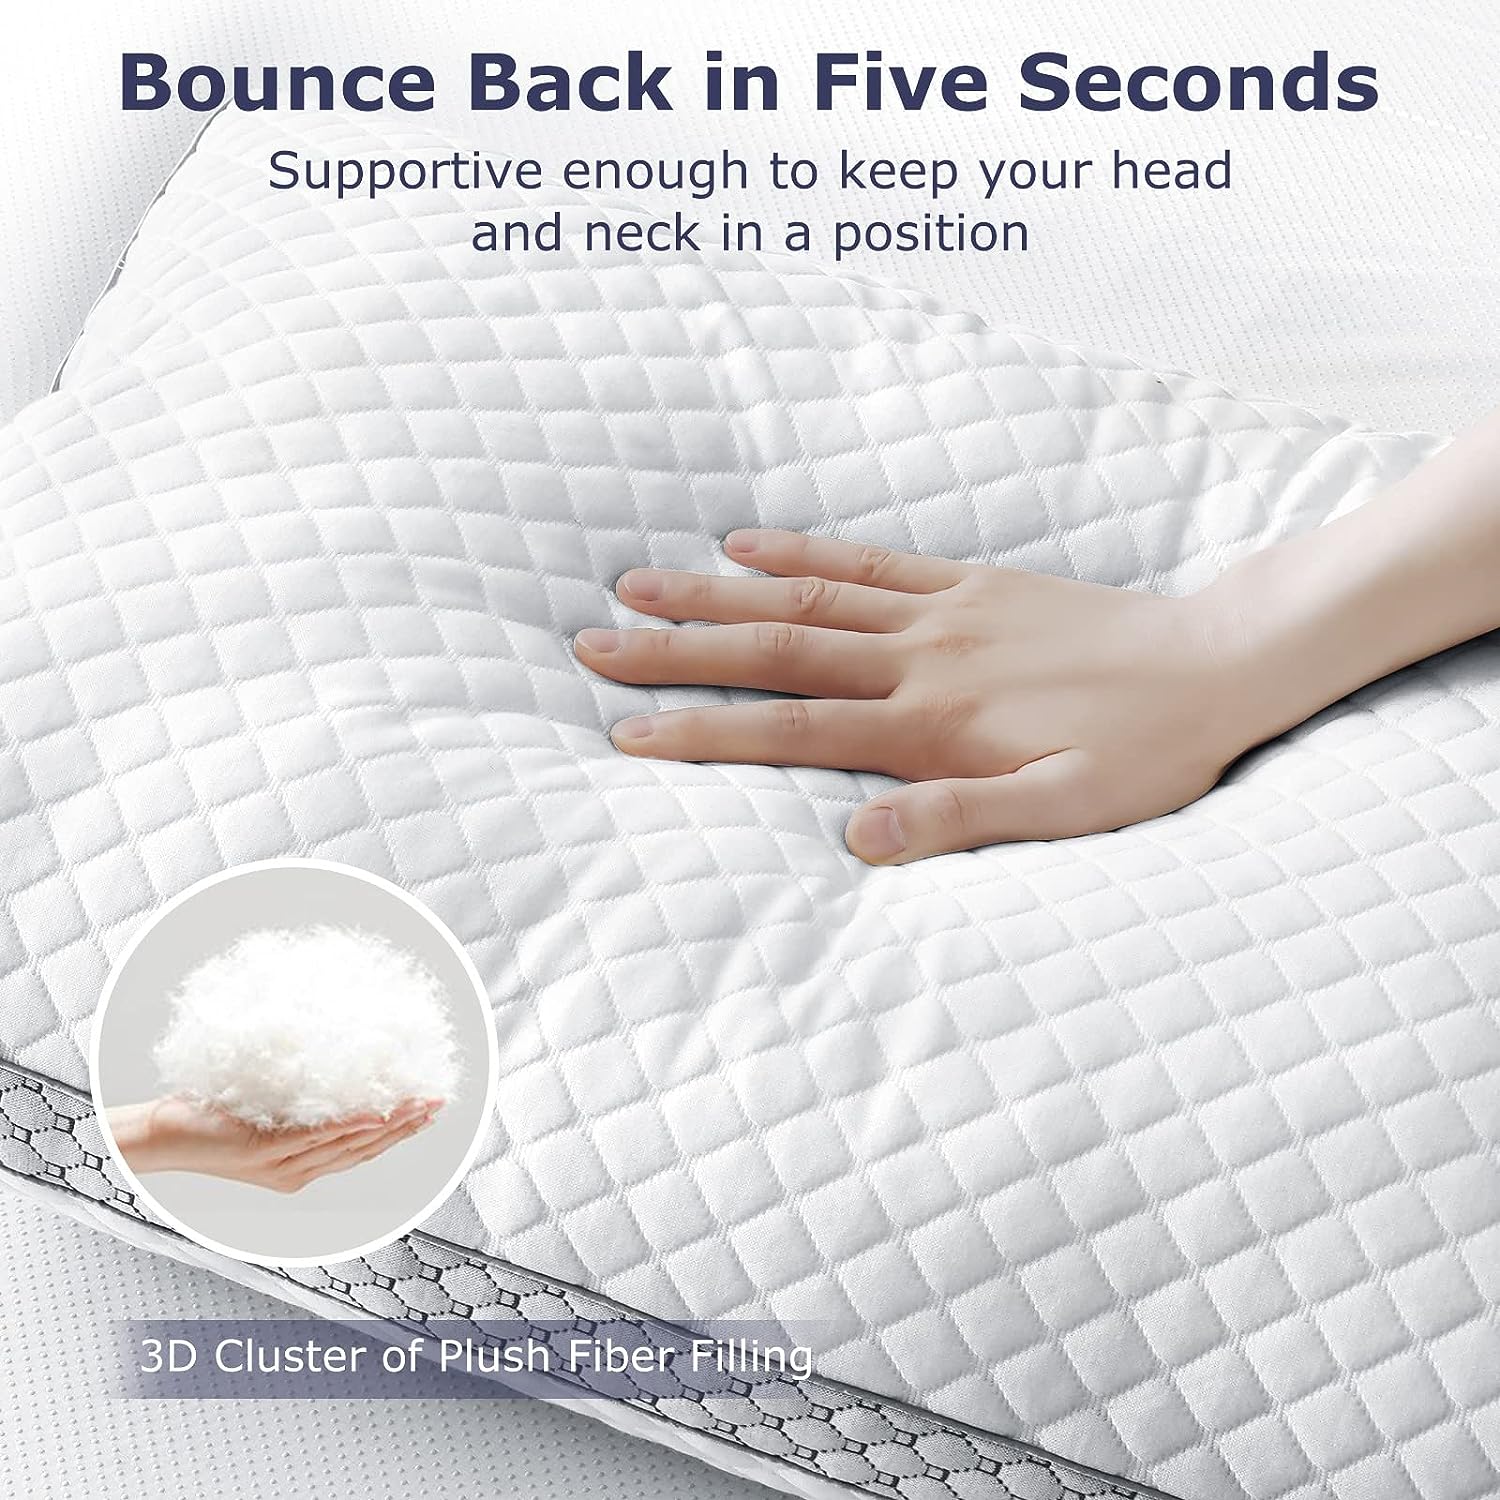 Bed Pillows for Sleeping 2 Pack Down Alternative Pillows Standard Size Set of 2 Soft Hotel Collection Pillows for Side and Back Sleepers Gusseted